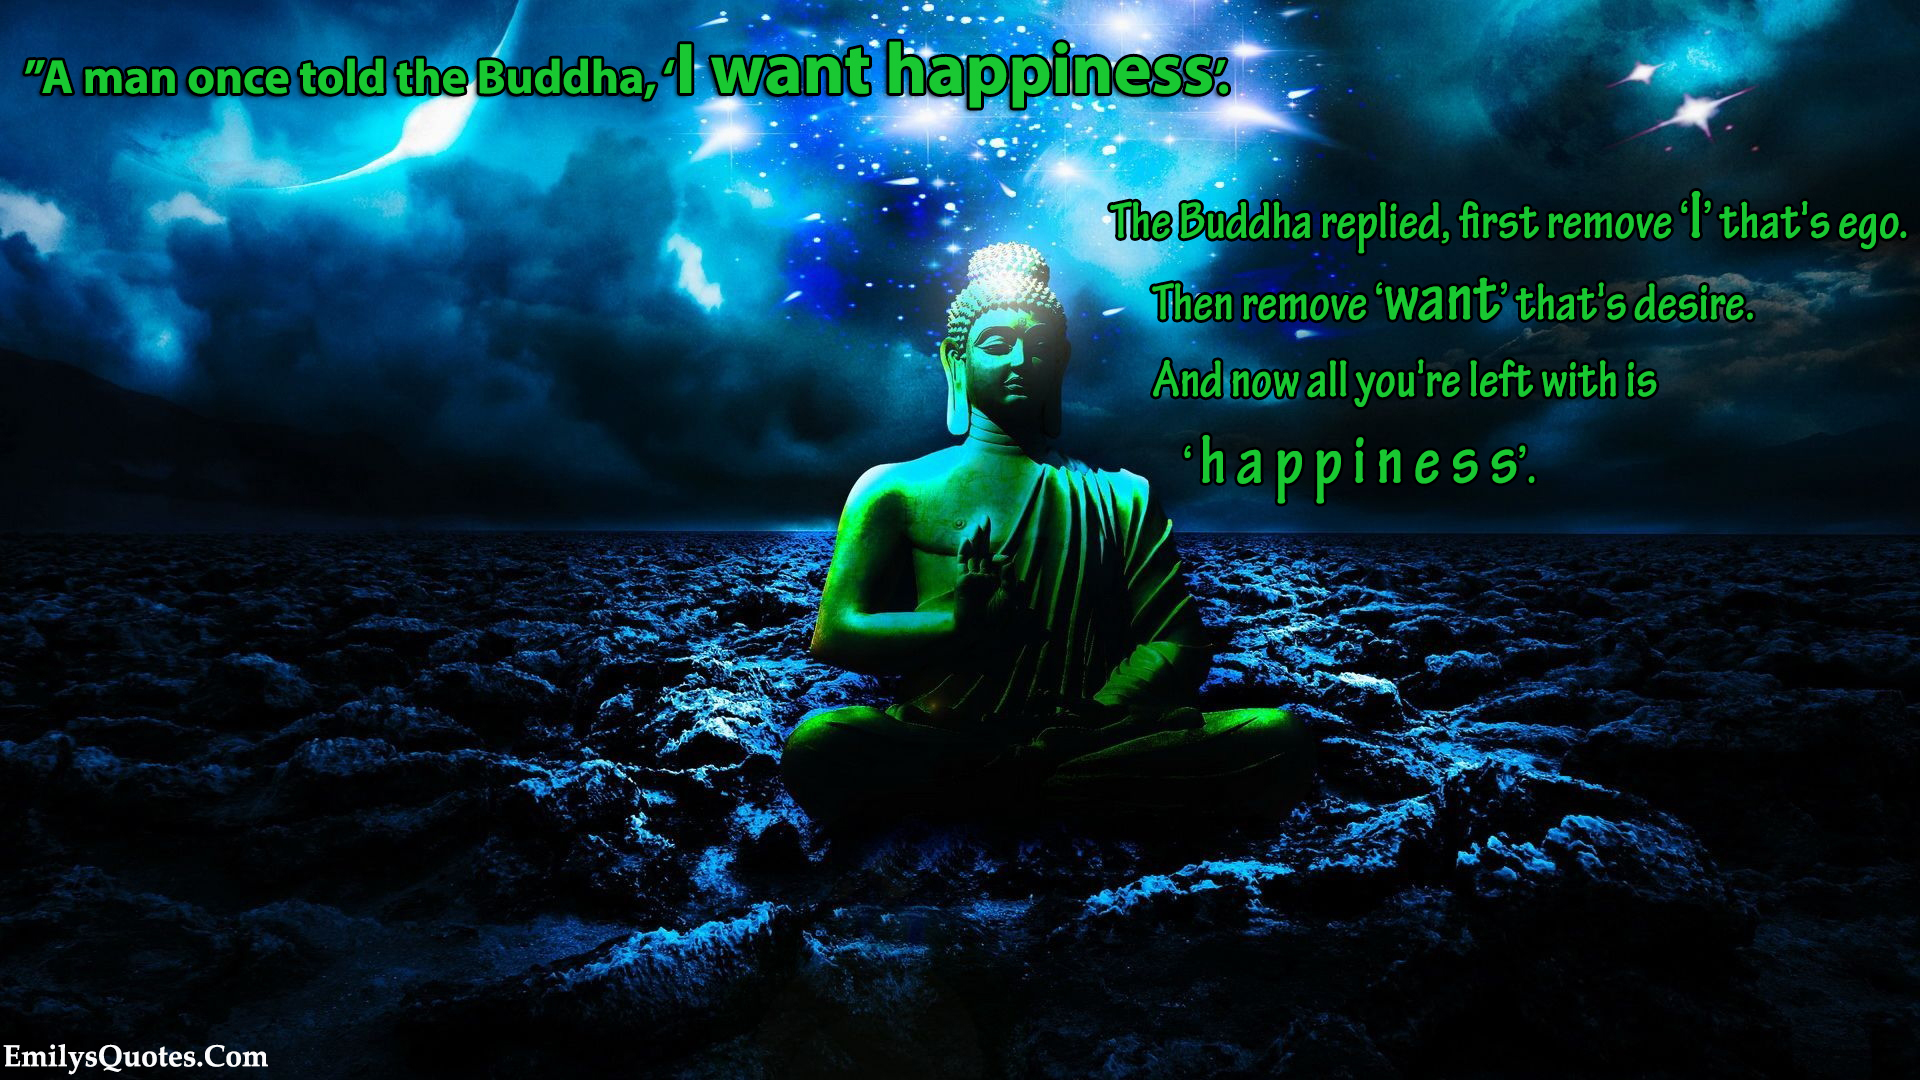 A man once told the Buddha, ‘I want happiness’